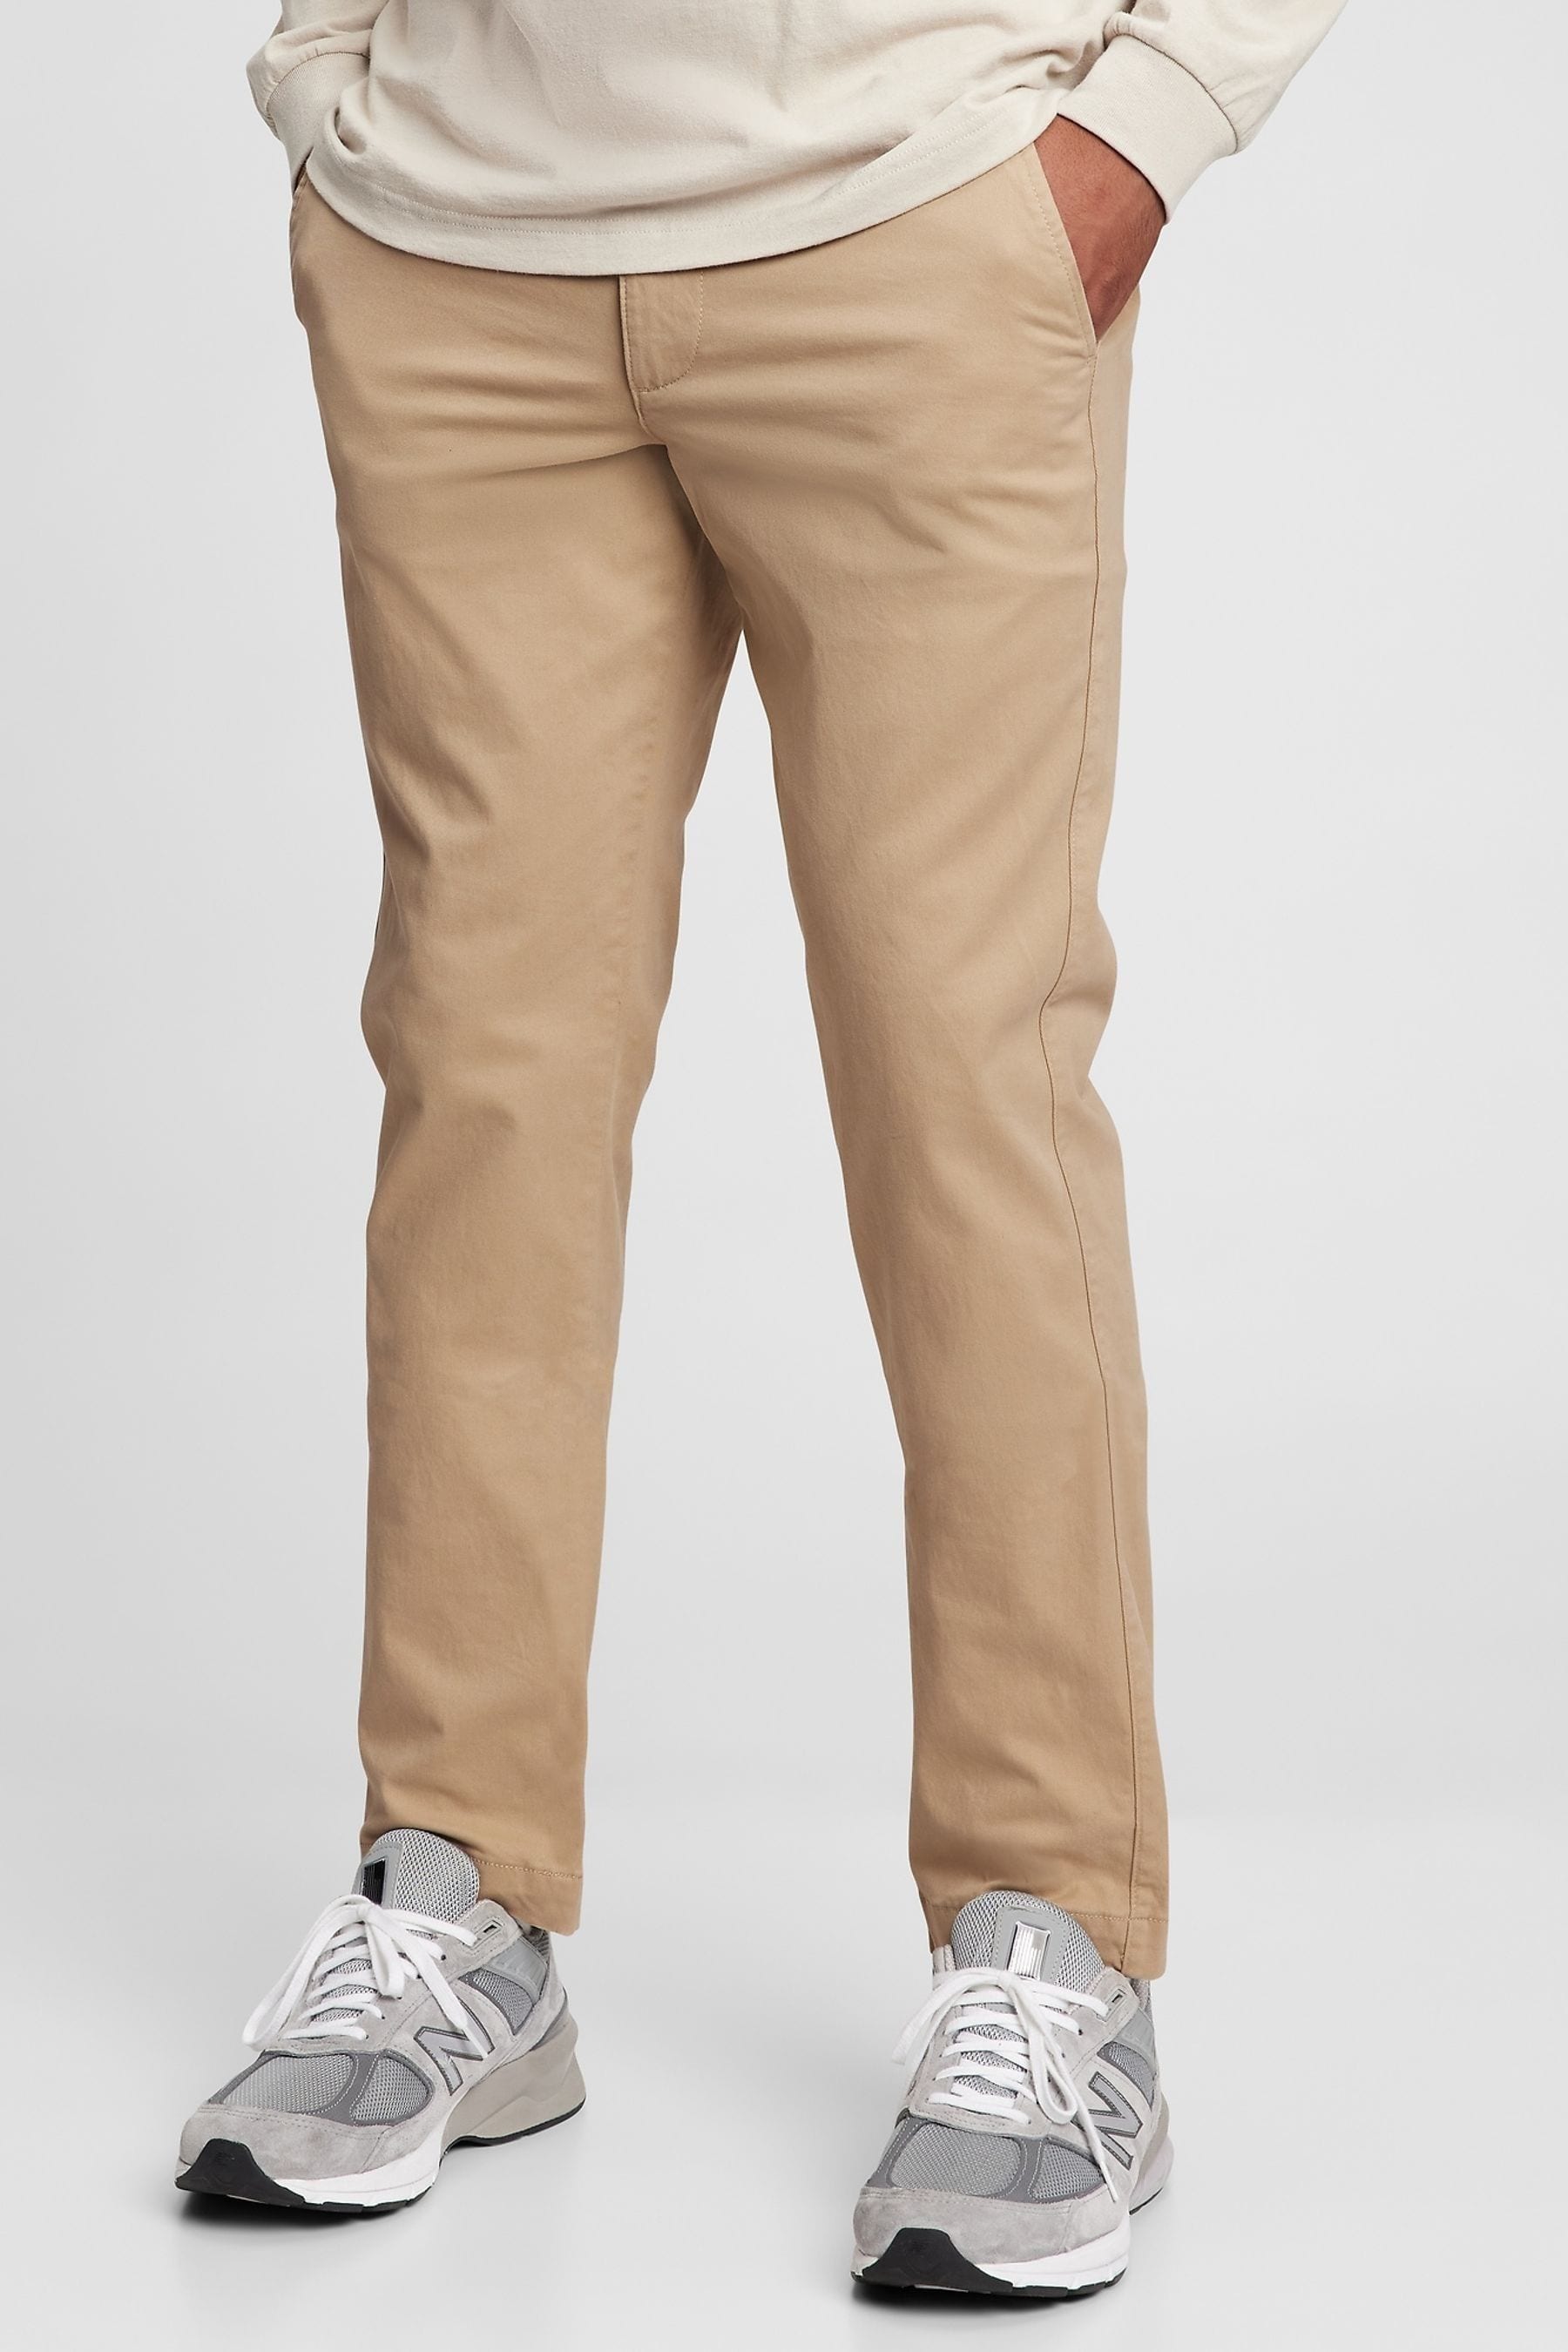 Buy Gap Tan Brown Essential Chinos in Slim Fit with Washwell from the ...